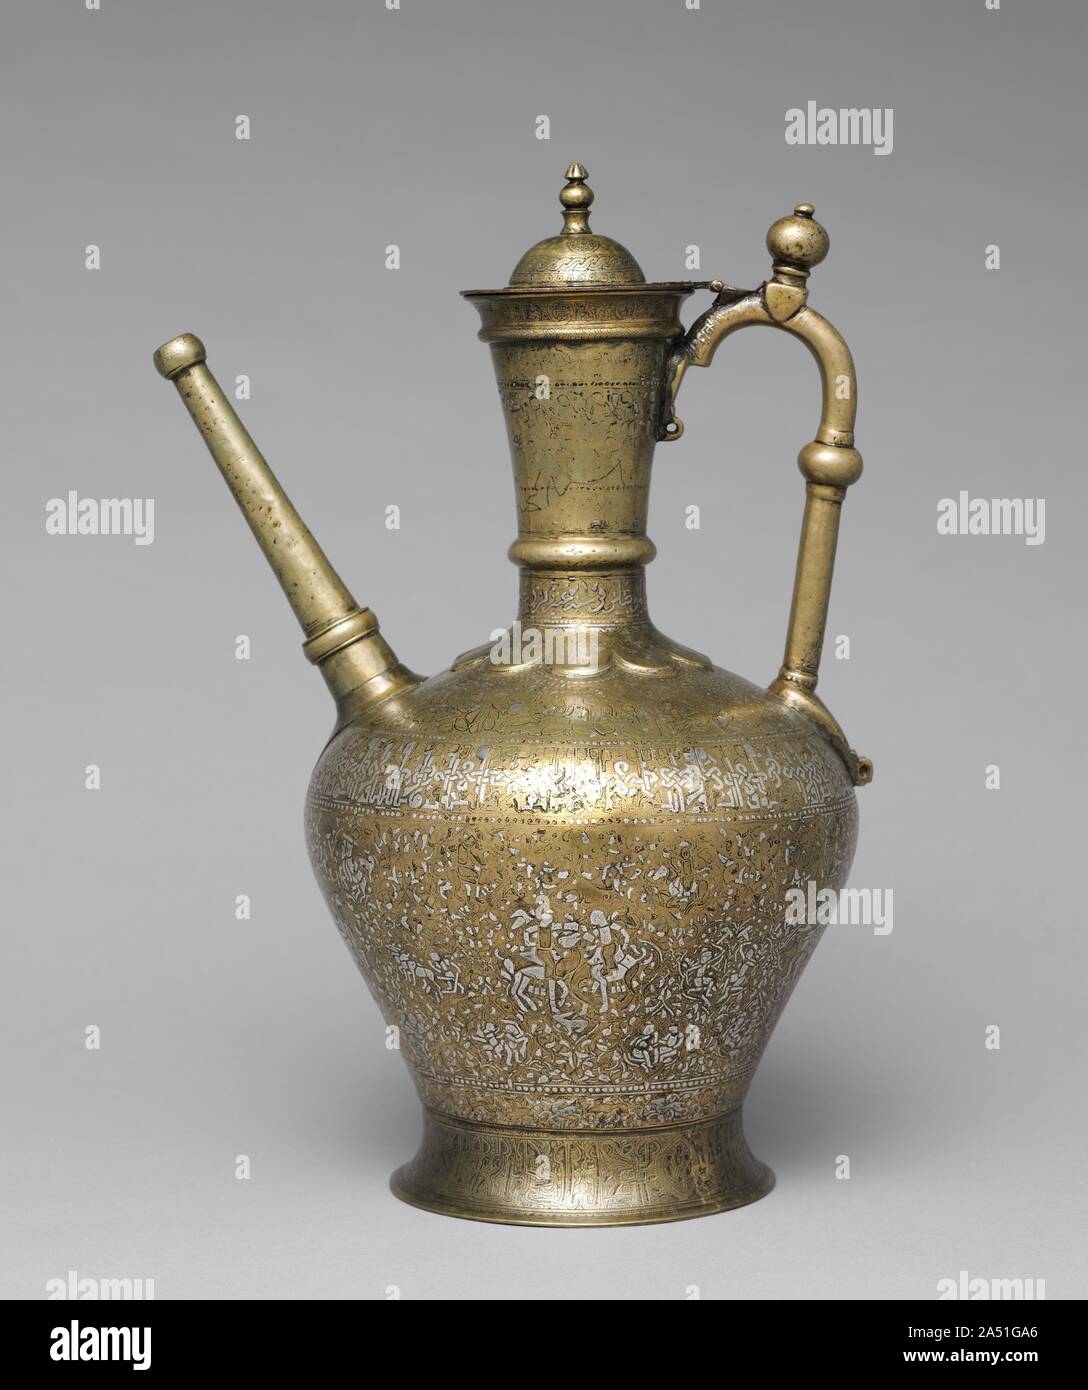 Luxury Ewer Extending Good Fortune to the Owner, 1223. The lavish silver inlaid surface features a wide band displaying medallions with scenes of court and daily life and an inscription band on the shoulder, written in plaited and animated kufic (angular) script, extending good fortune, generosity, and charitable giving to the owner. This celebrated ewer is dated 1223 and signed by the master craftsman Ahmad al-Dhaki of Mosul. Stock Photo